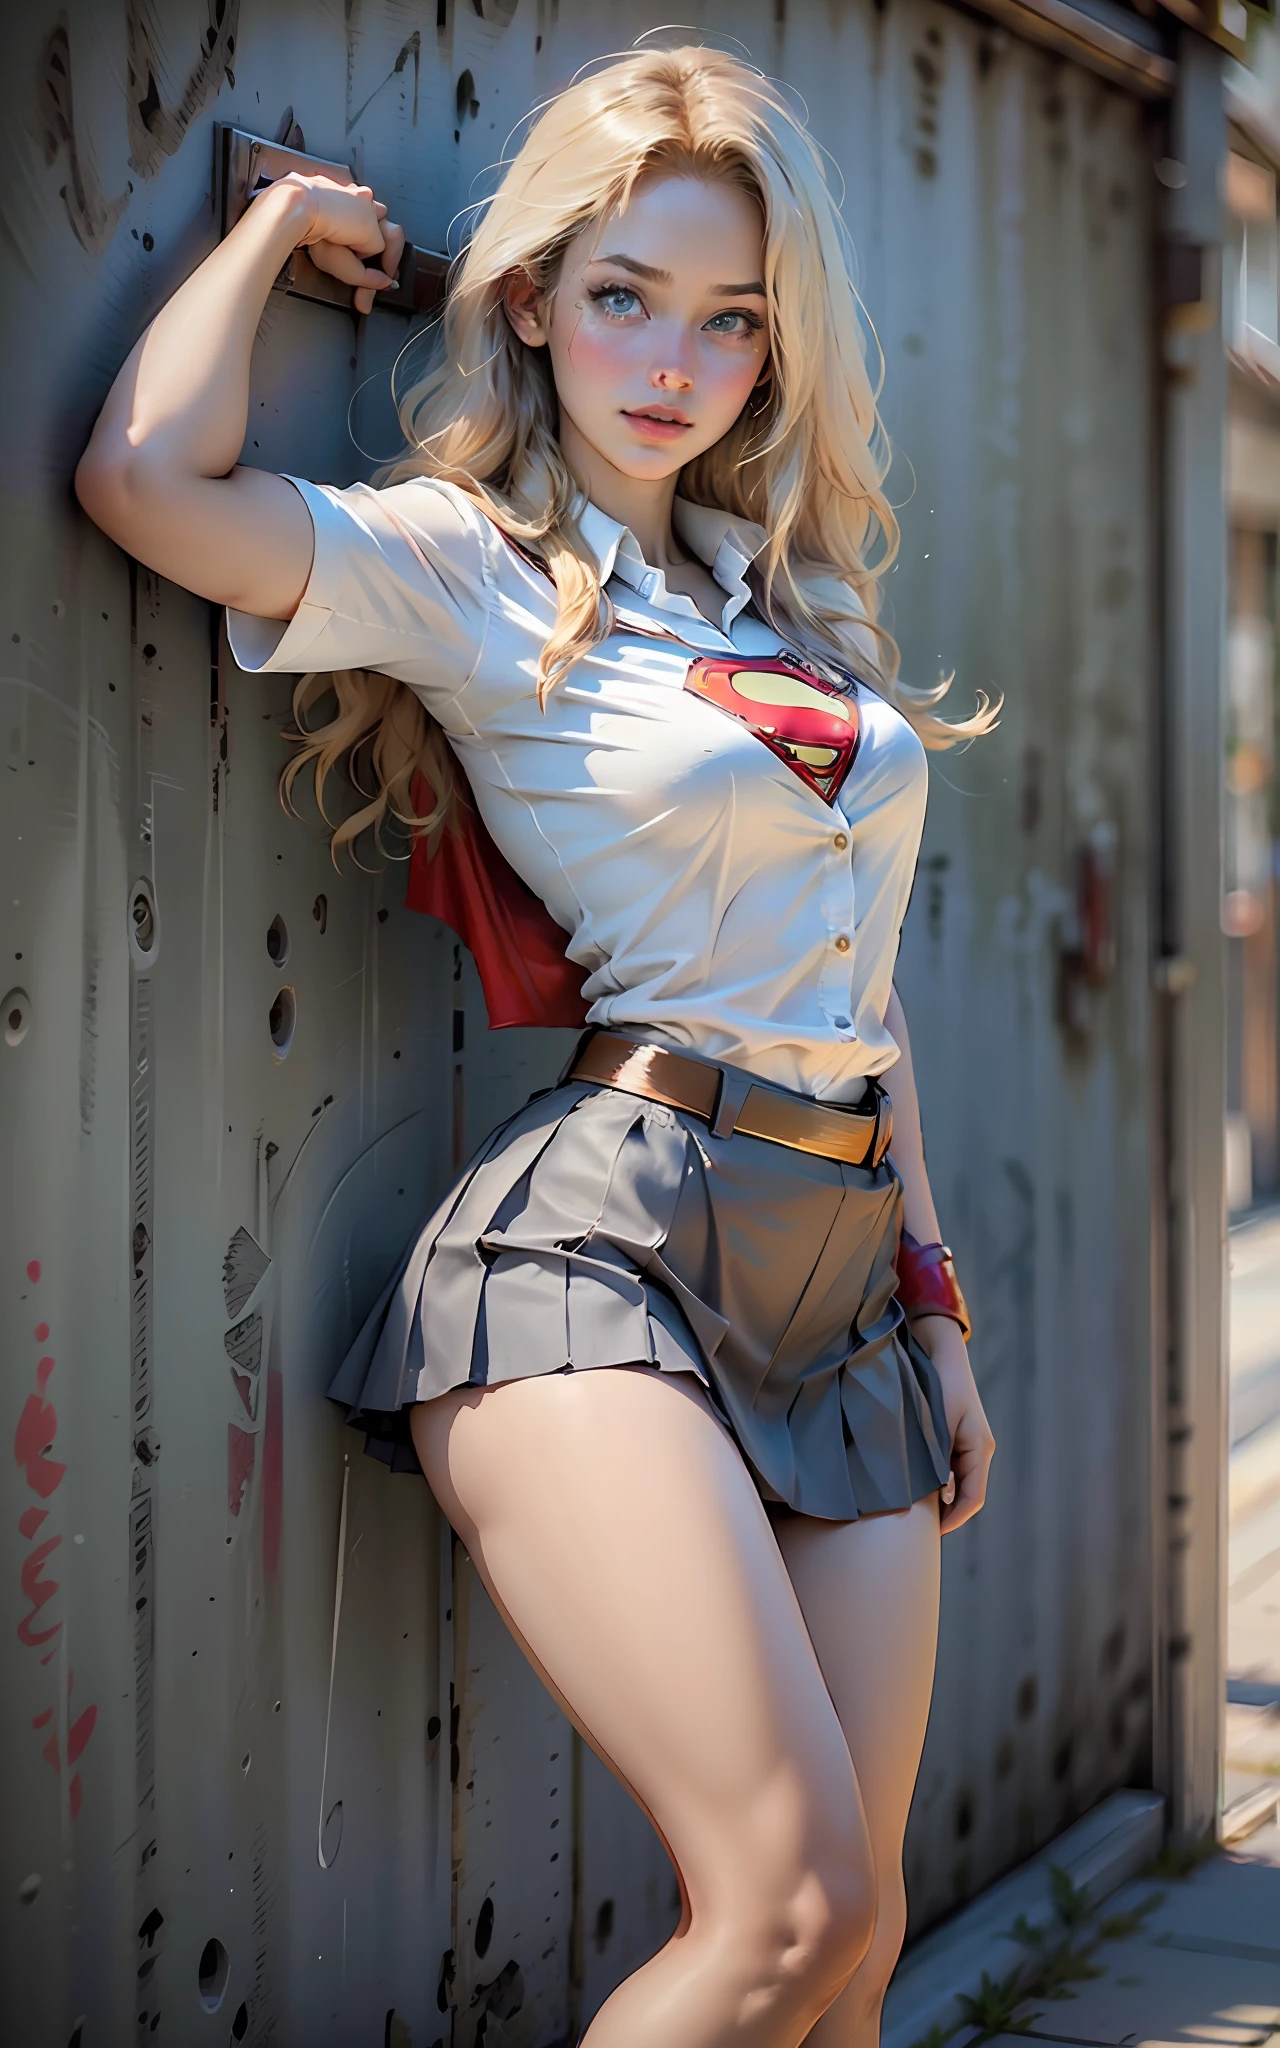 ((best quality, best resolution, absurd, 8k, masterpiece)) ,1girl, woman,Helen Slater (Supergirl Actress),young woman, 19 years old, long blonde hair, expressive blue eyes, female Korean school uniform (white blouse and pleated miniskirt), Supergirl cosplay wearing female Korean , medium-large bust,